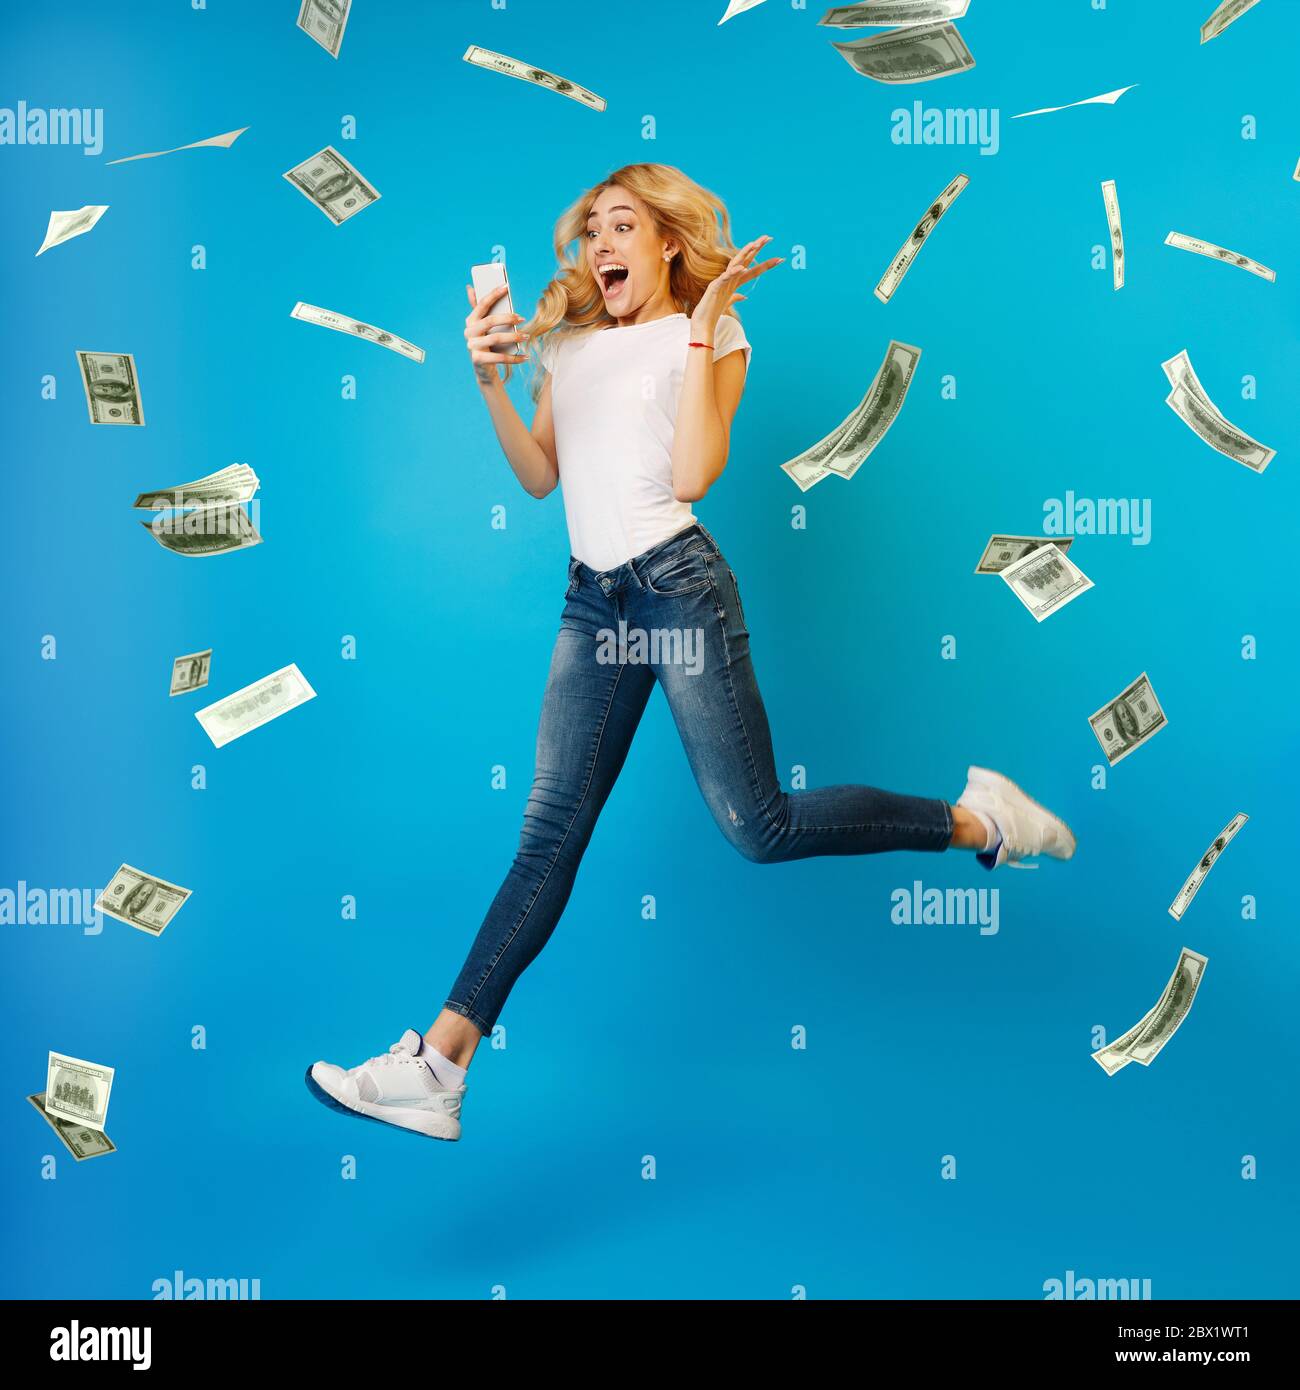 Online Lottery. Overjoyed Woman Jumping With Smartphone Under Money Shower, Celebrating Victory Stock Photo